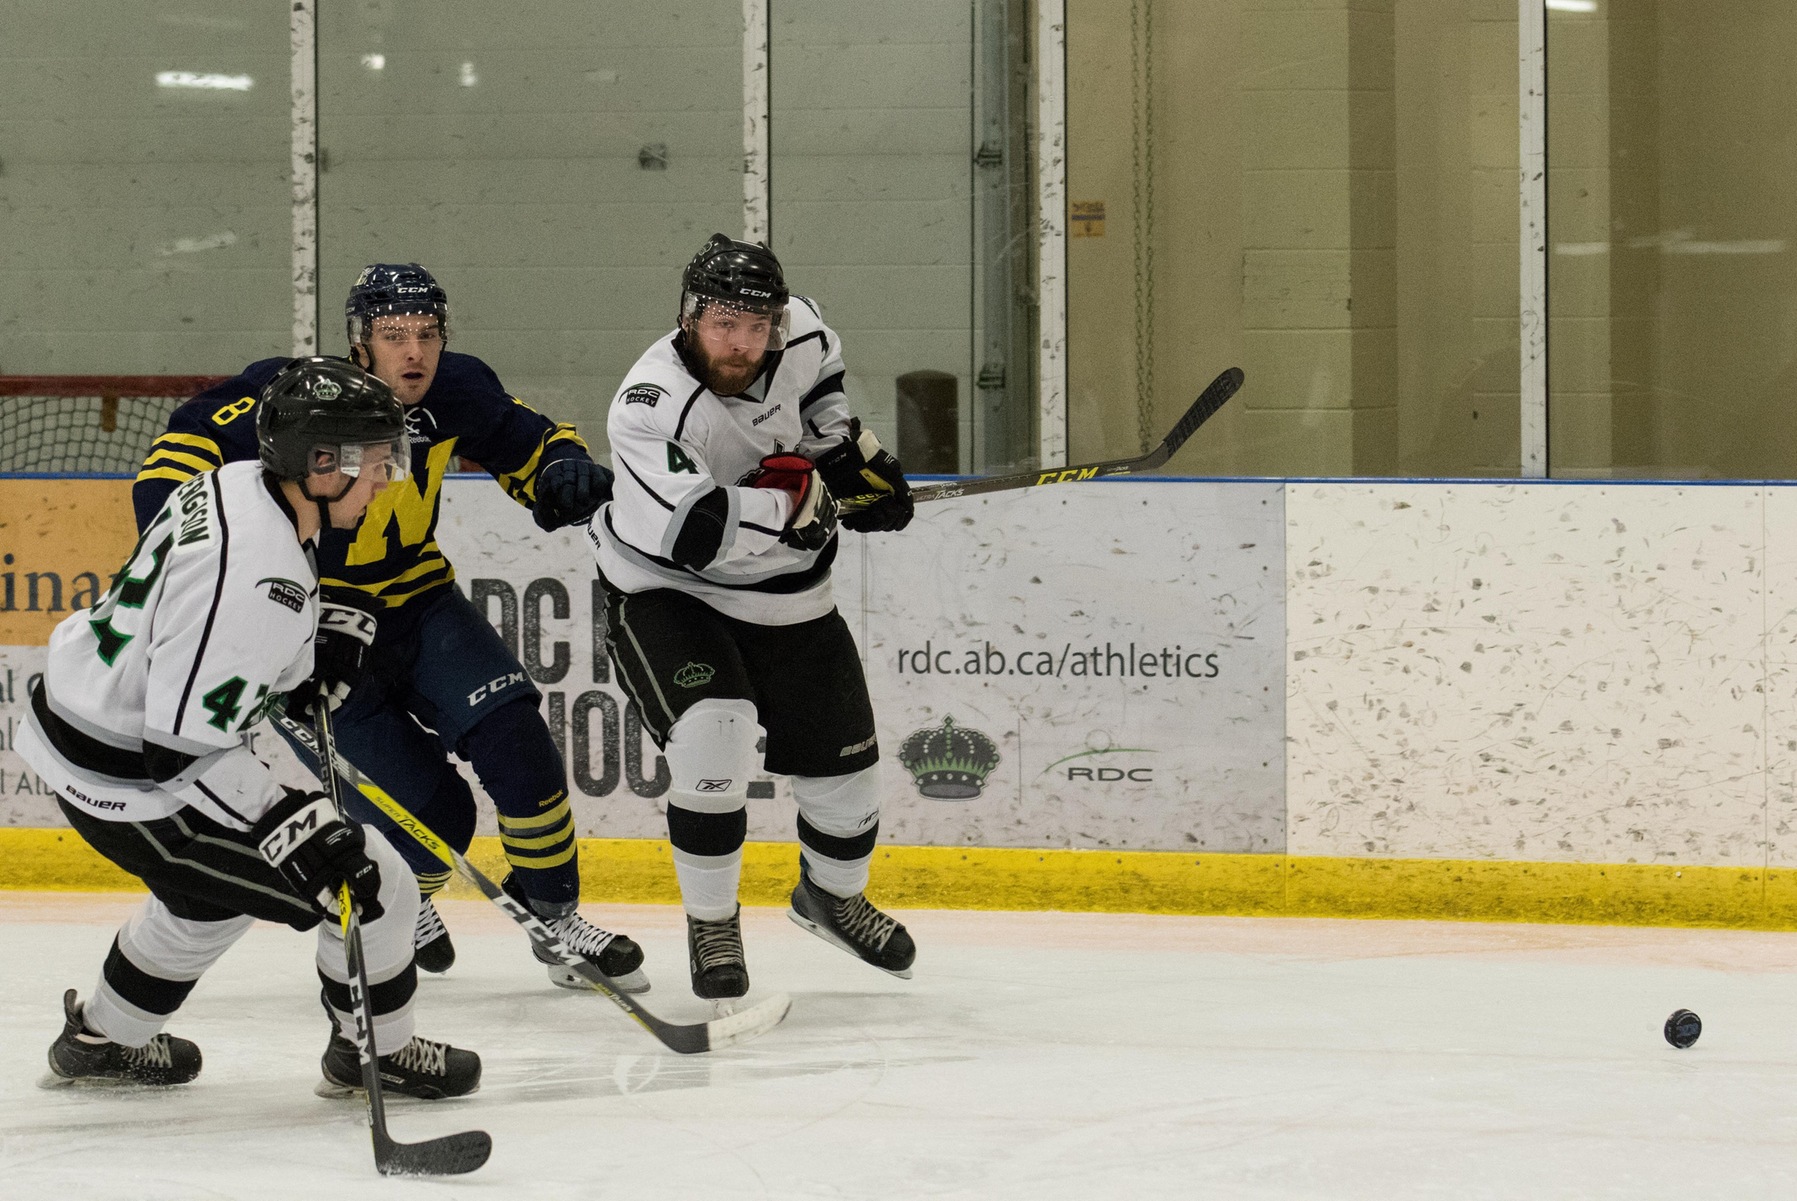 Scott Ferguson (42) and Mike Statchuk (4) take control in the defensive zone.